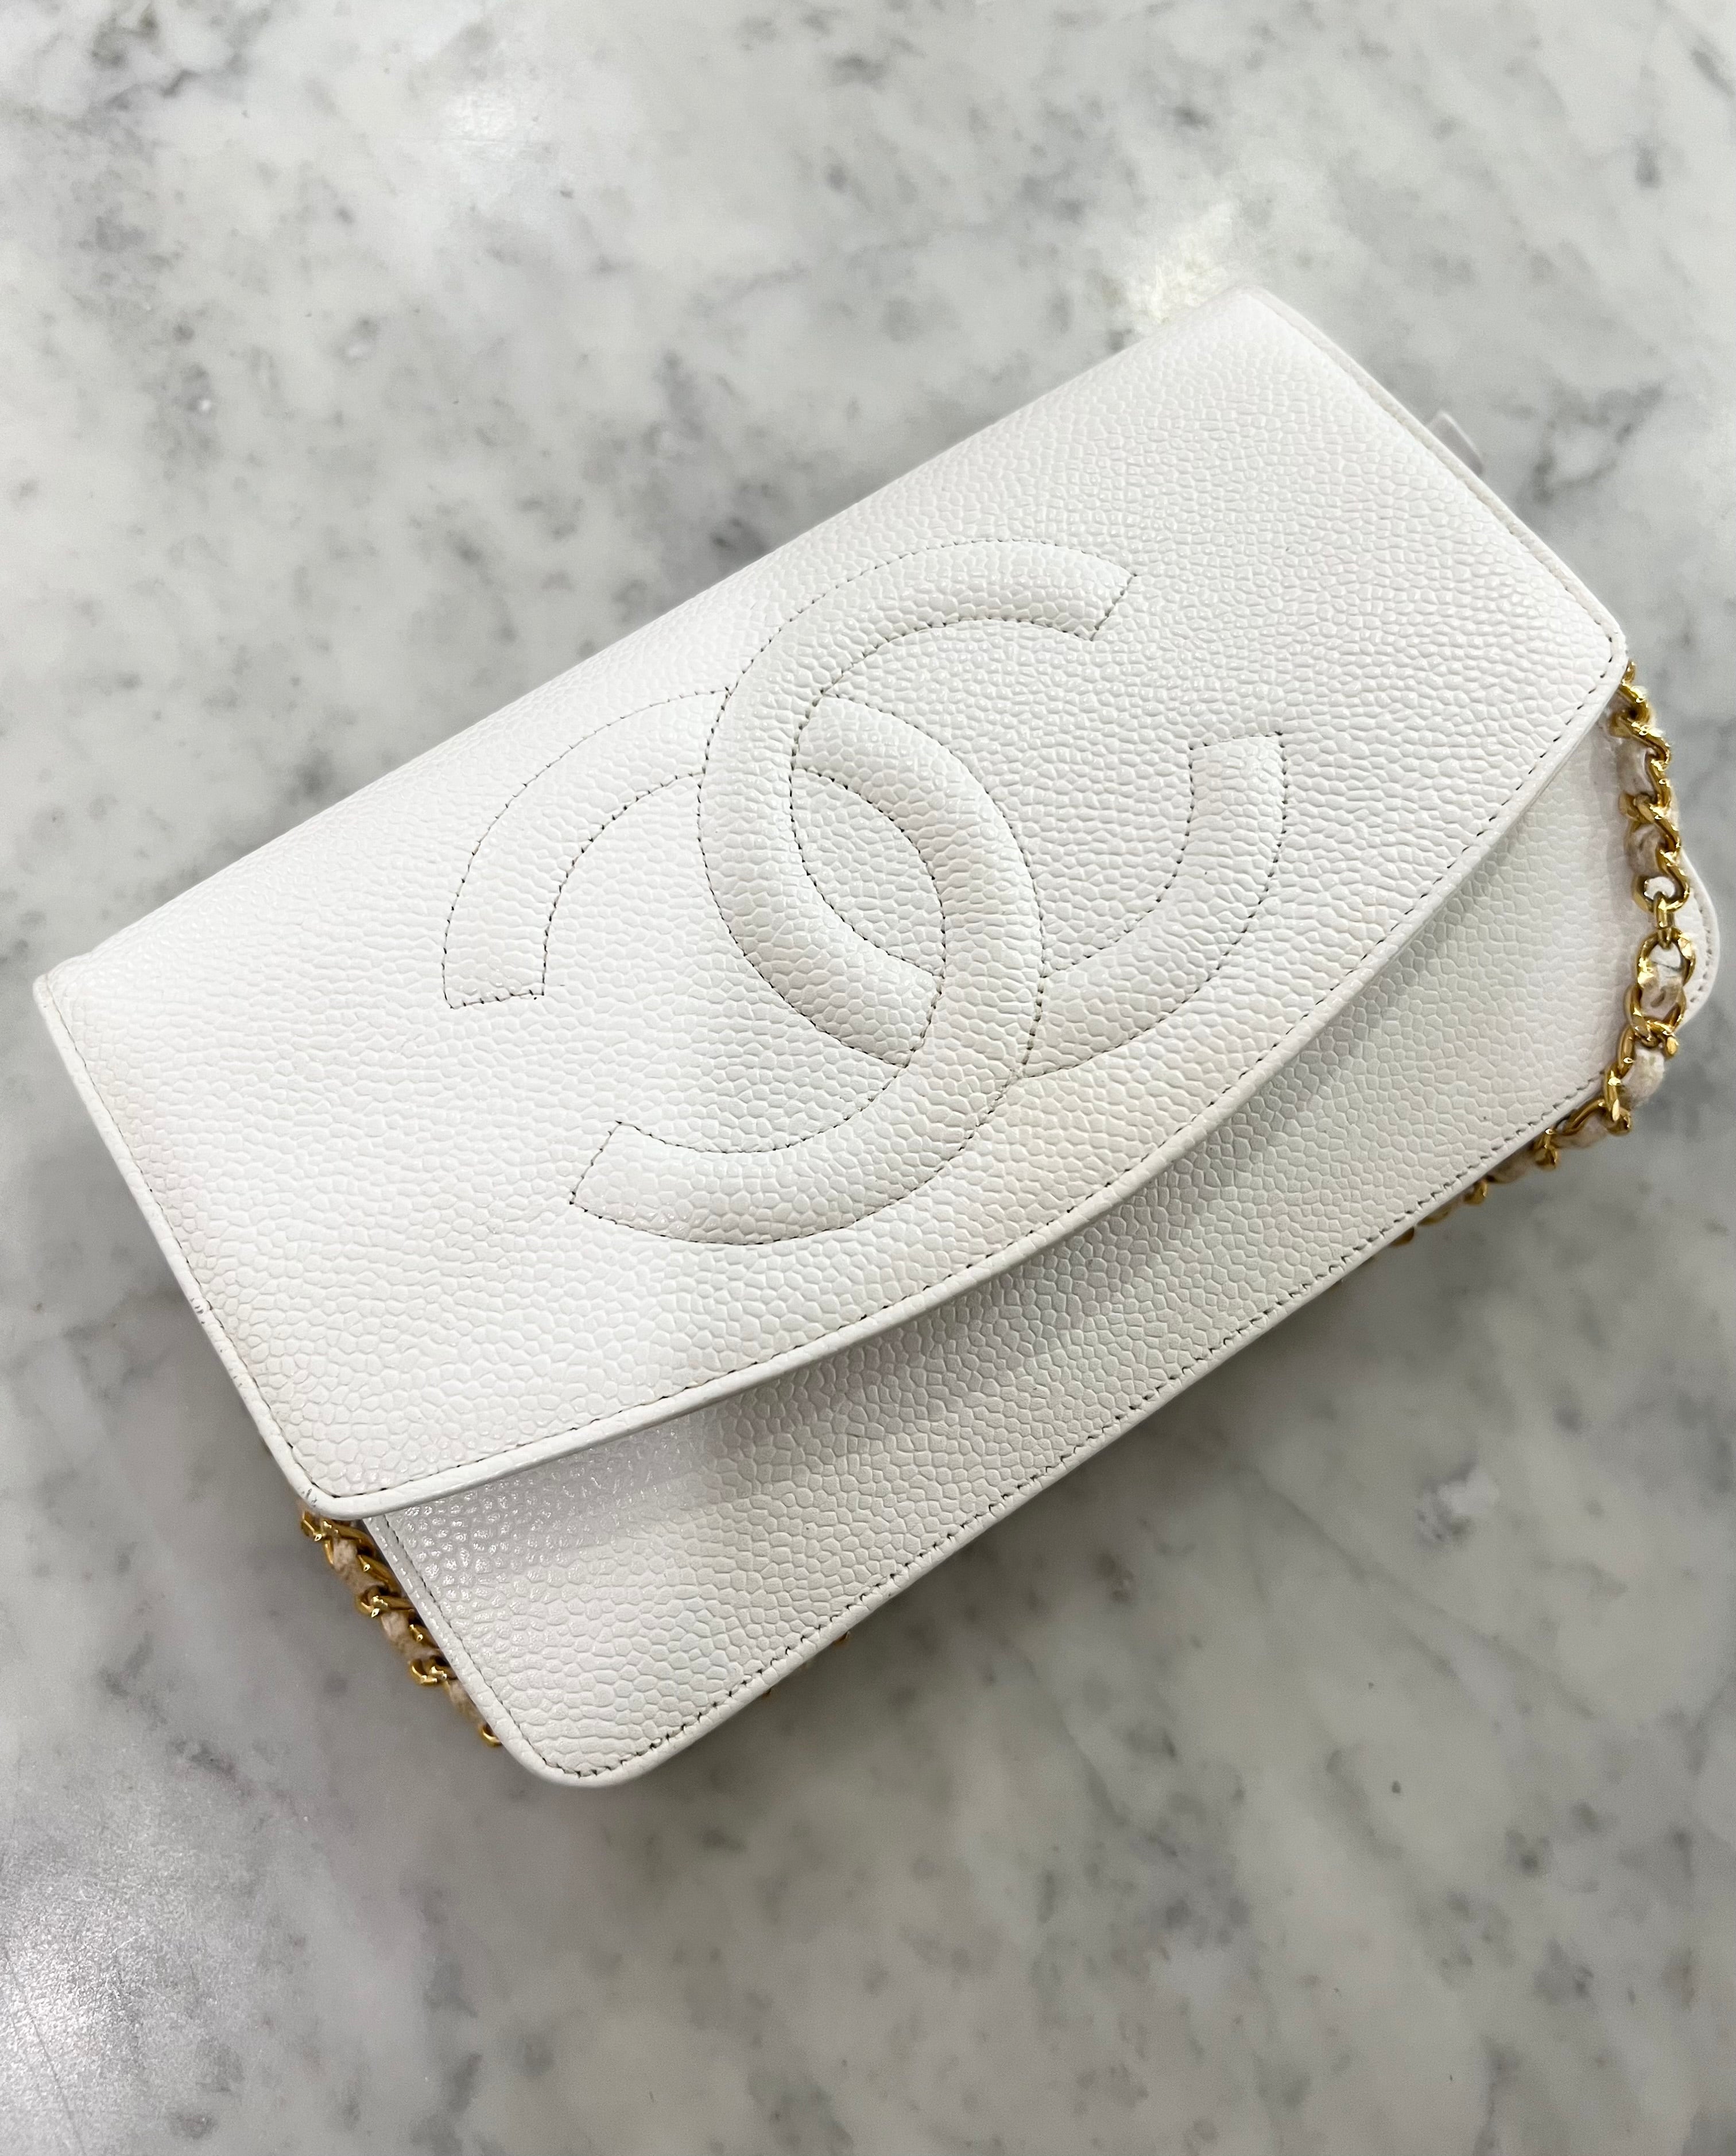 Chanel Classic Wallet on Chain, White Caviar with Silver Hardware, Preowned  in Box WA001